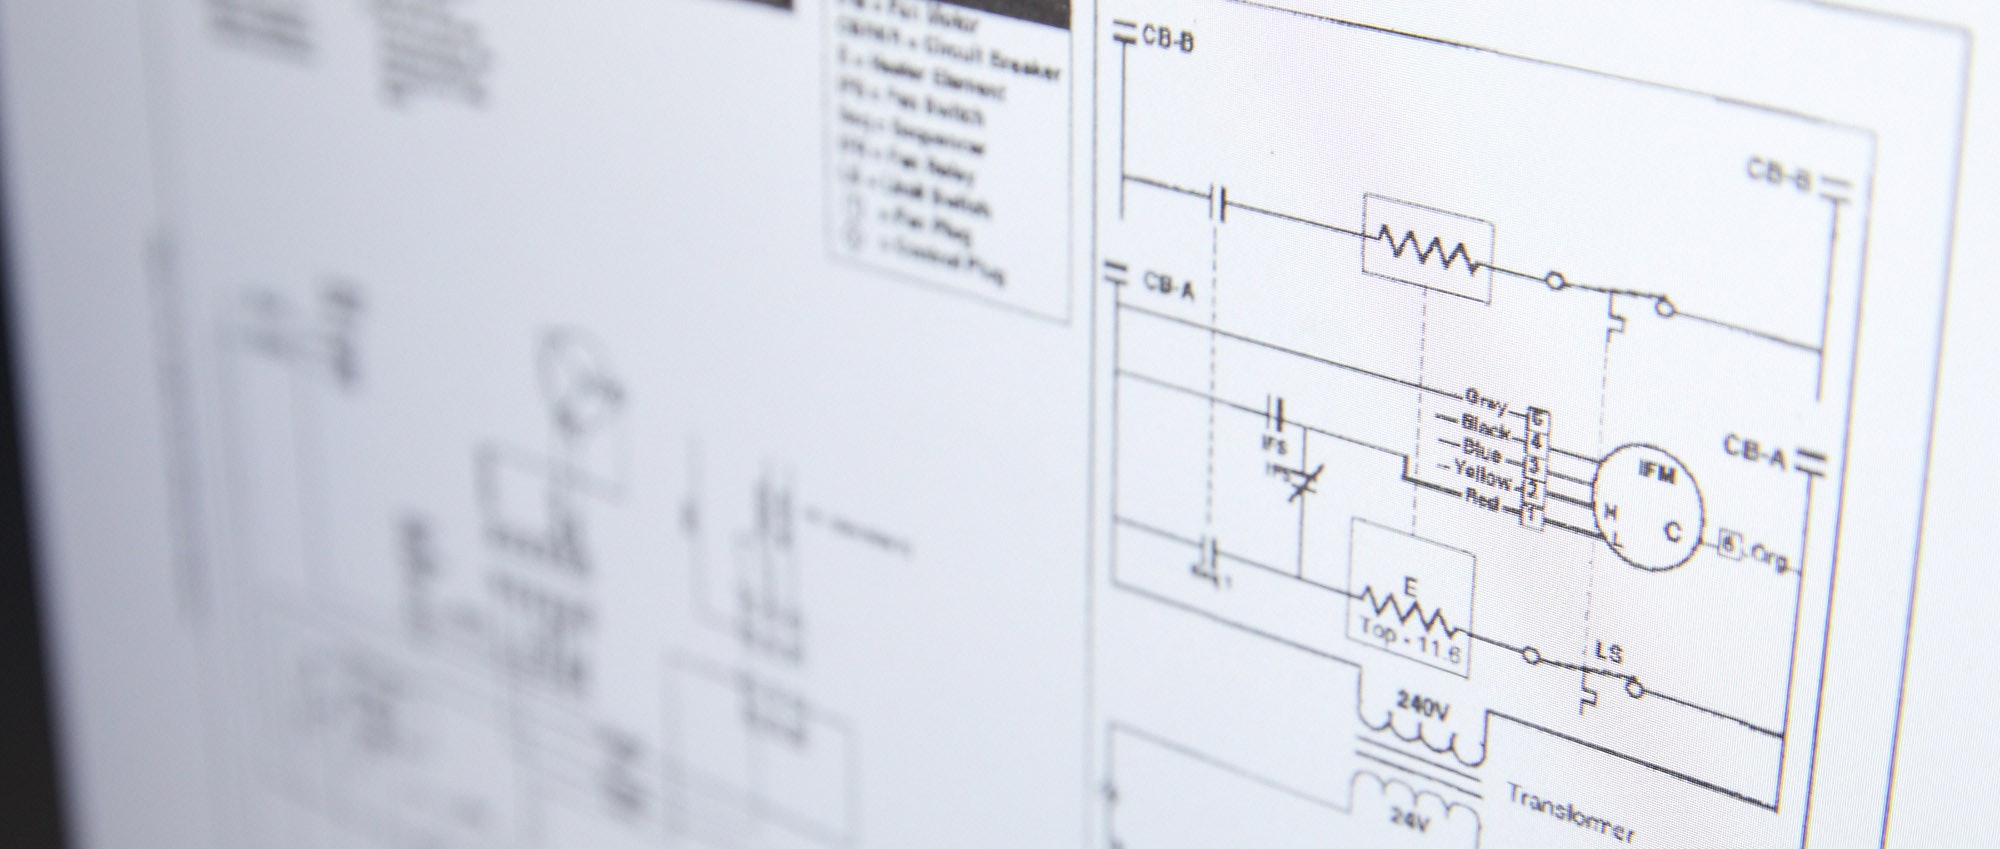 Services Headers engineering-drawing-schematic-electrical-circuit-diagram-copy